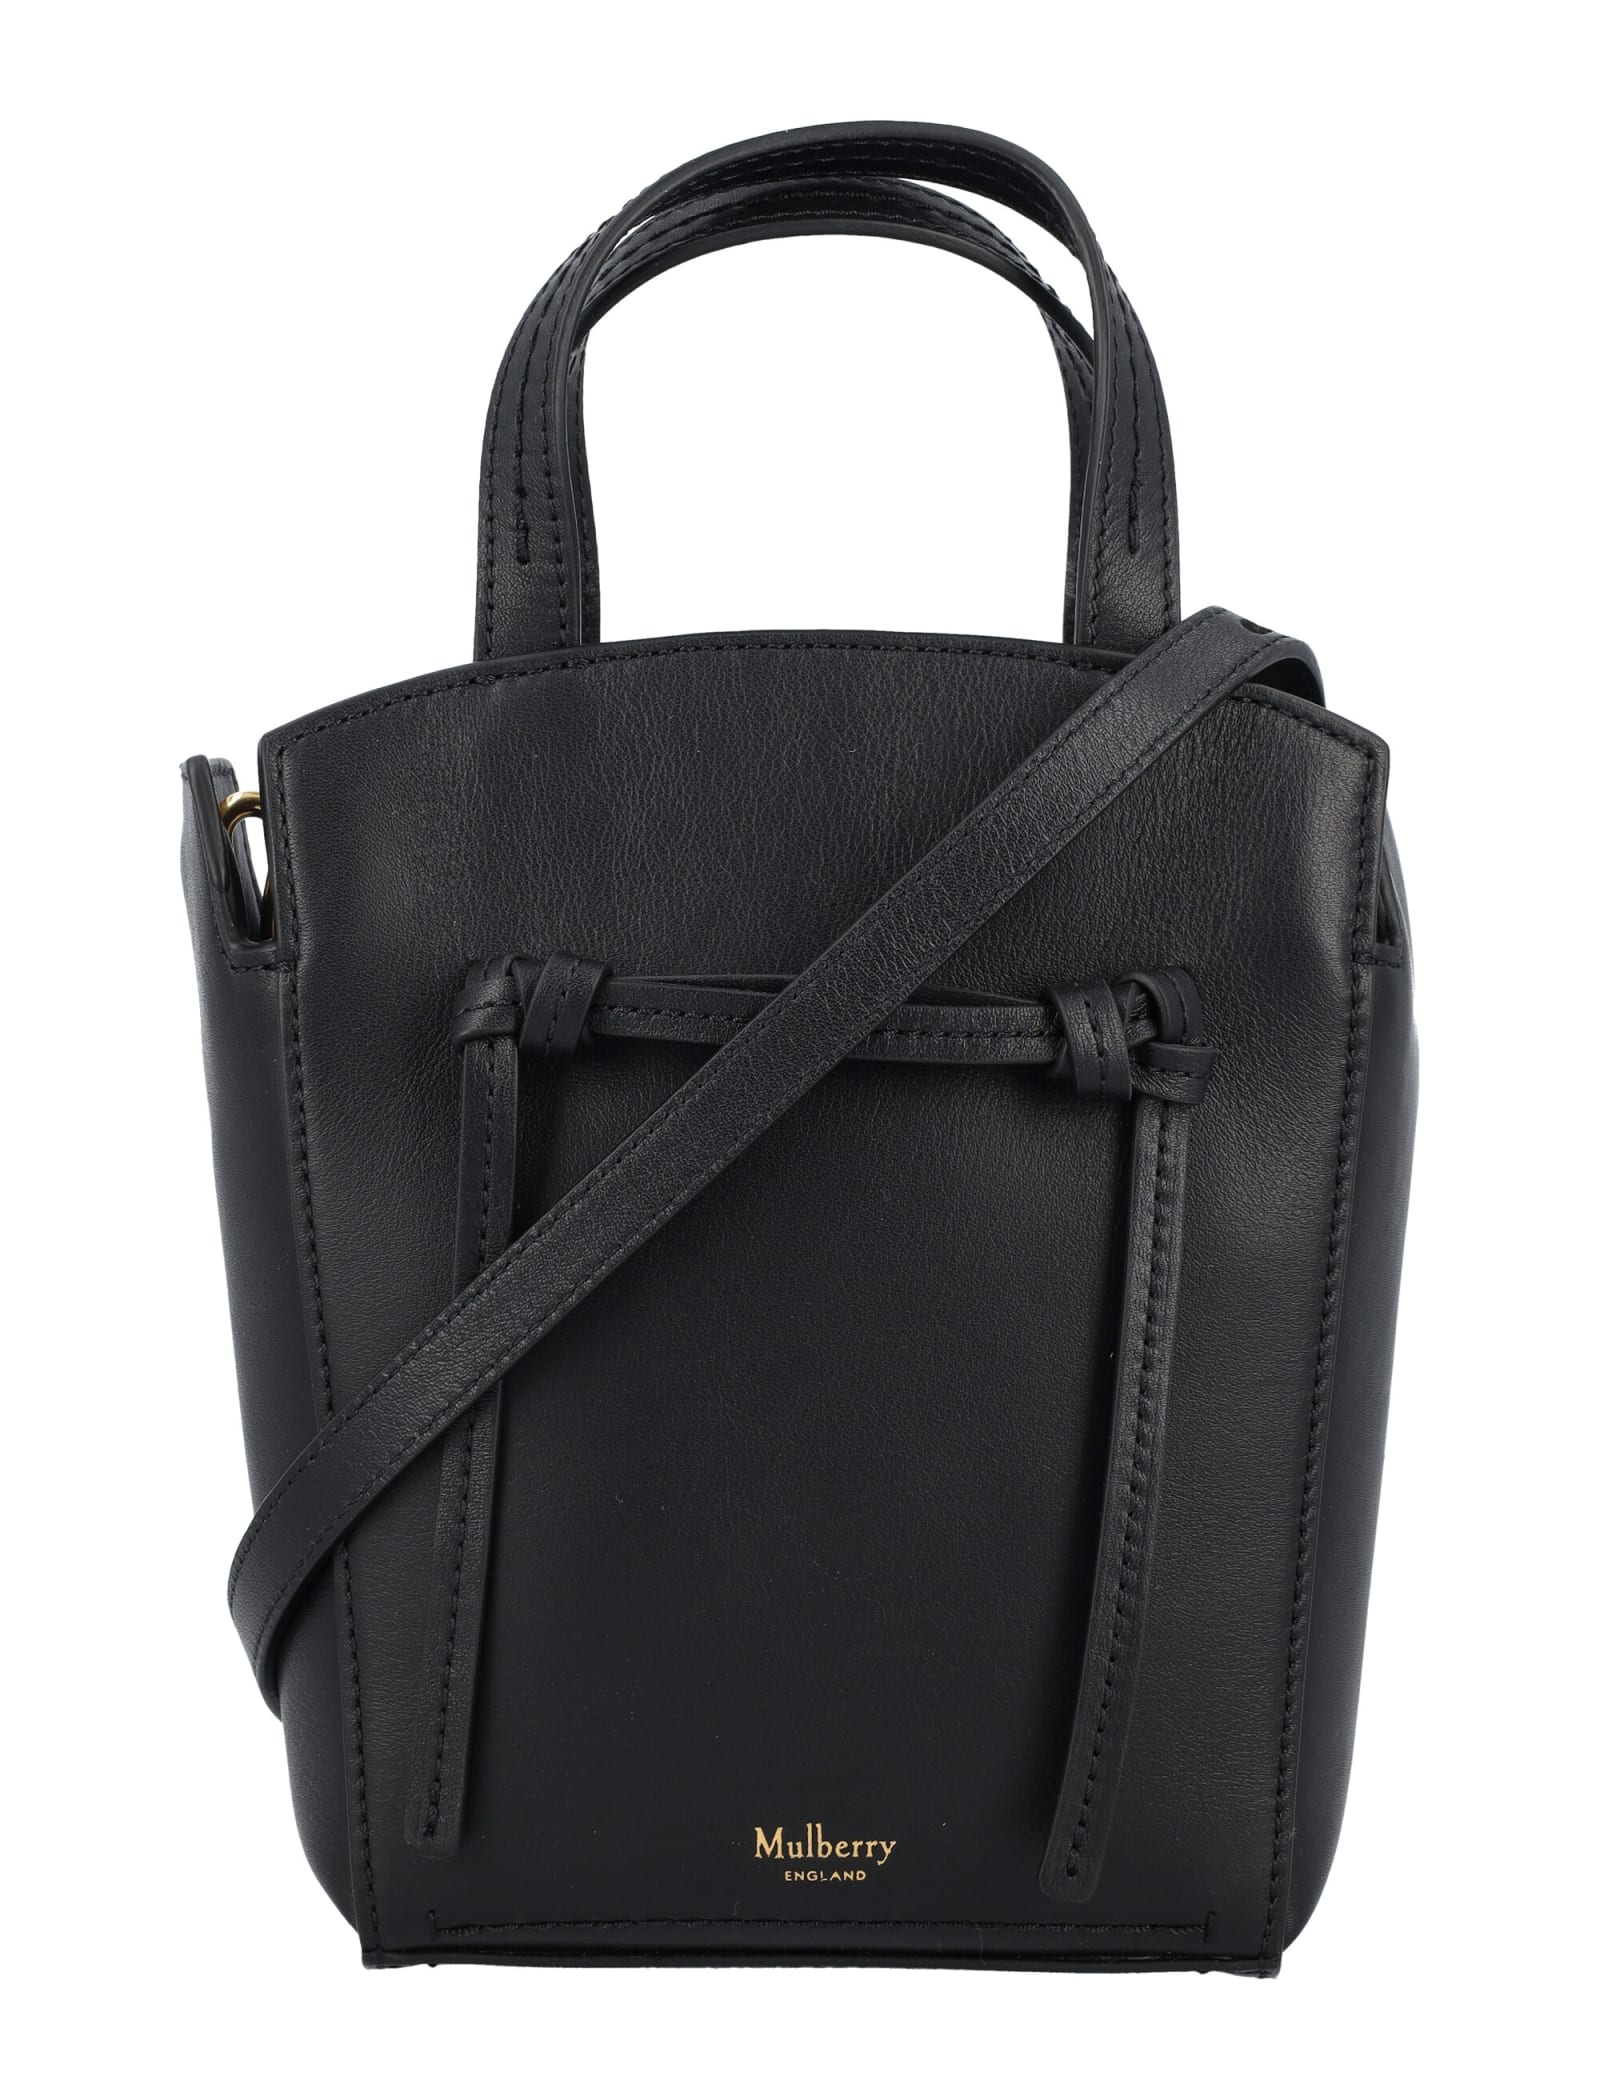 Mulberry Clovelly Mini Tote In Black